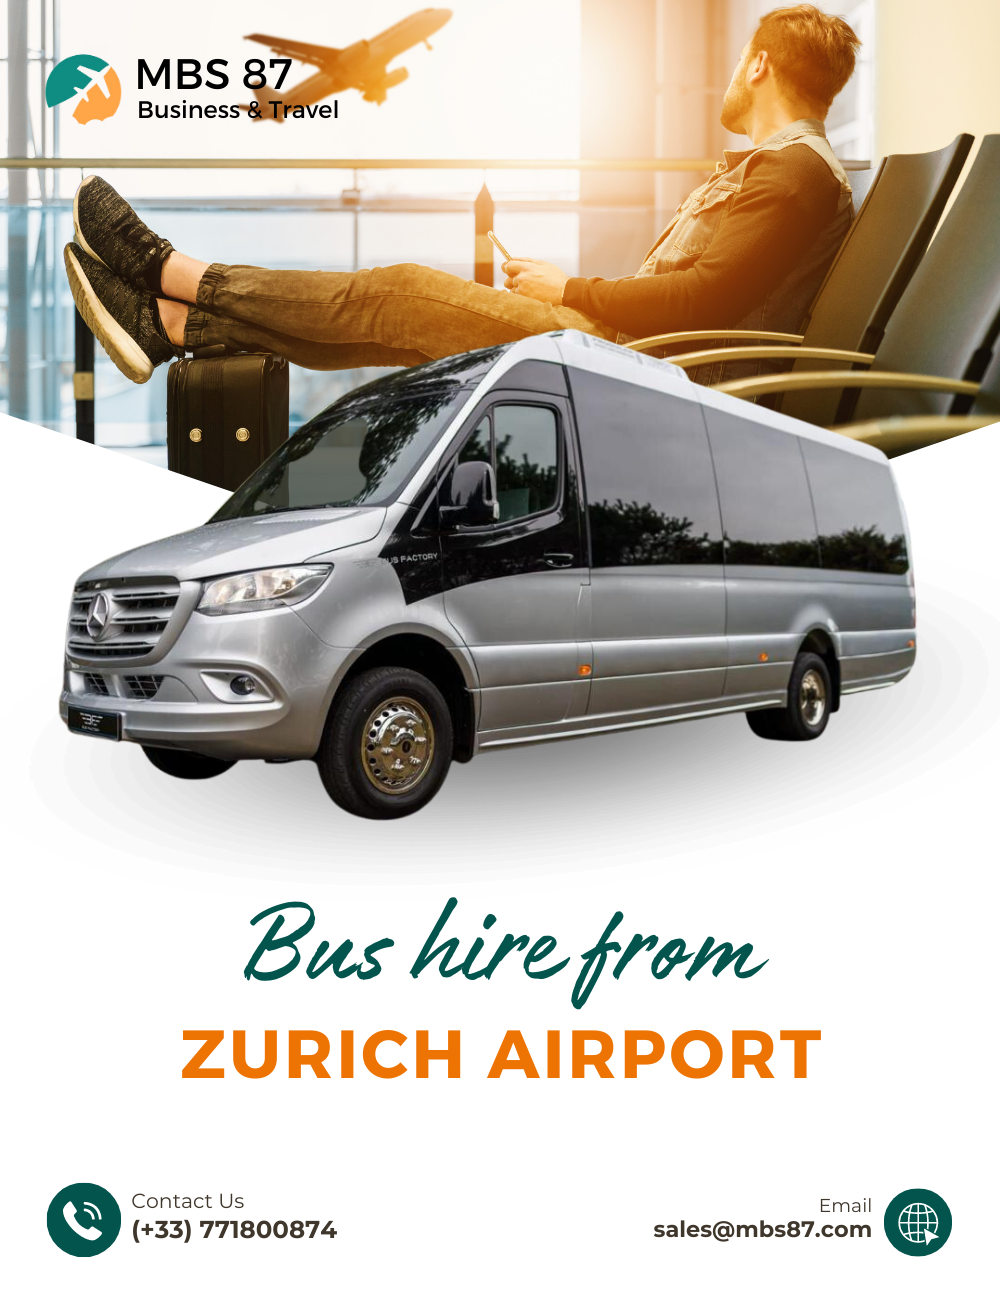 Bus Service From Zurich Airport - How to find it?